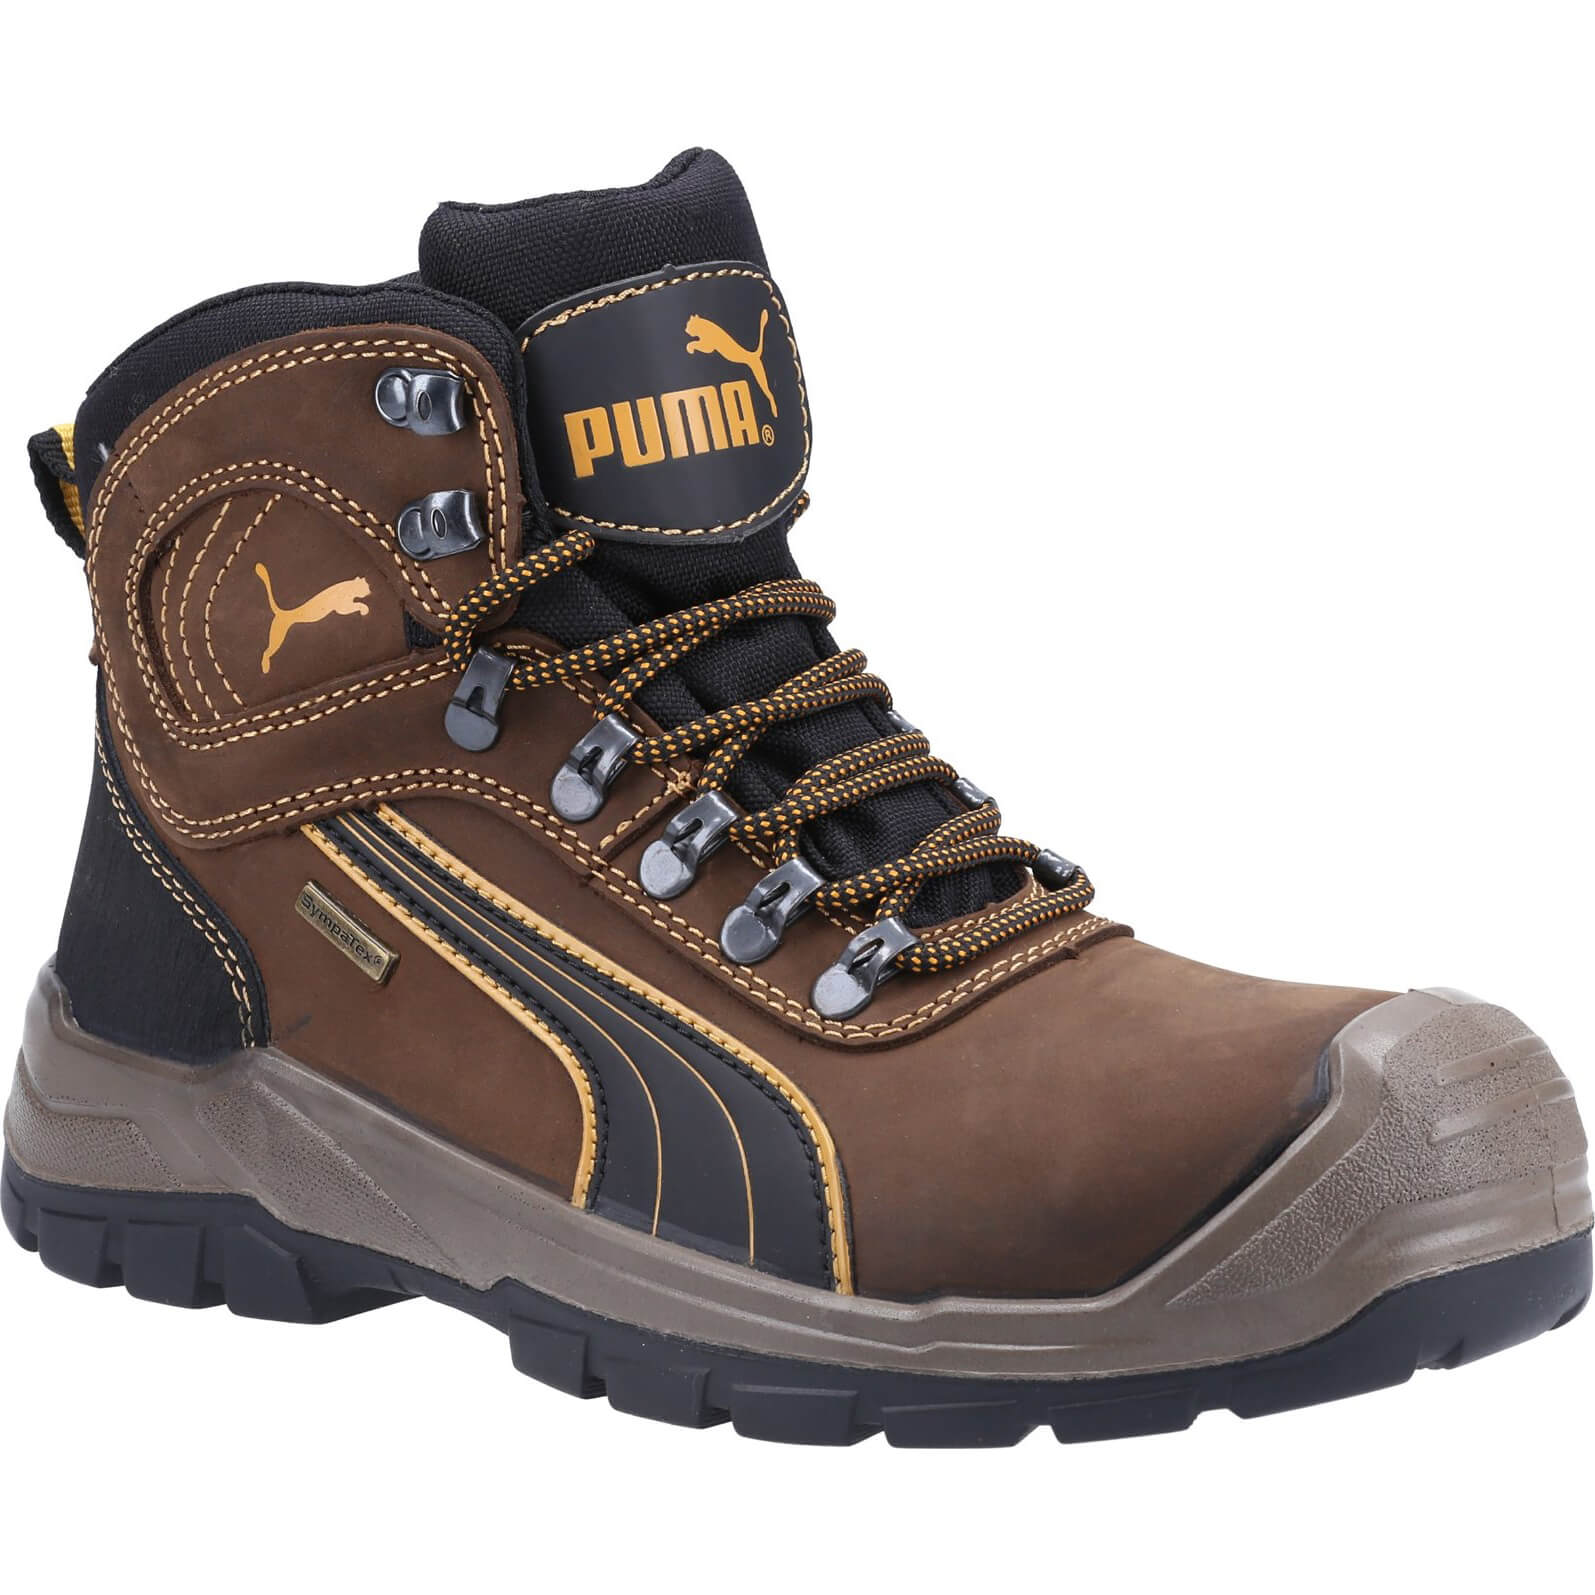 Image of Puma Mens Sierra Nevada Mid Safety Boots Brown Size 7